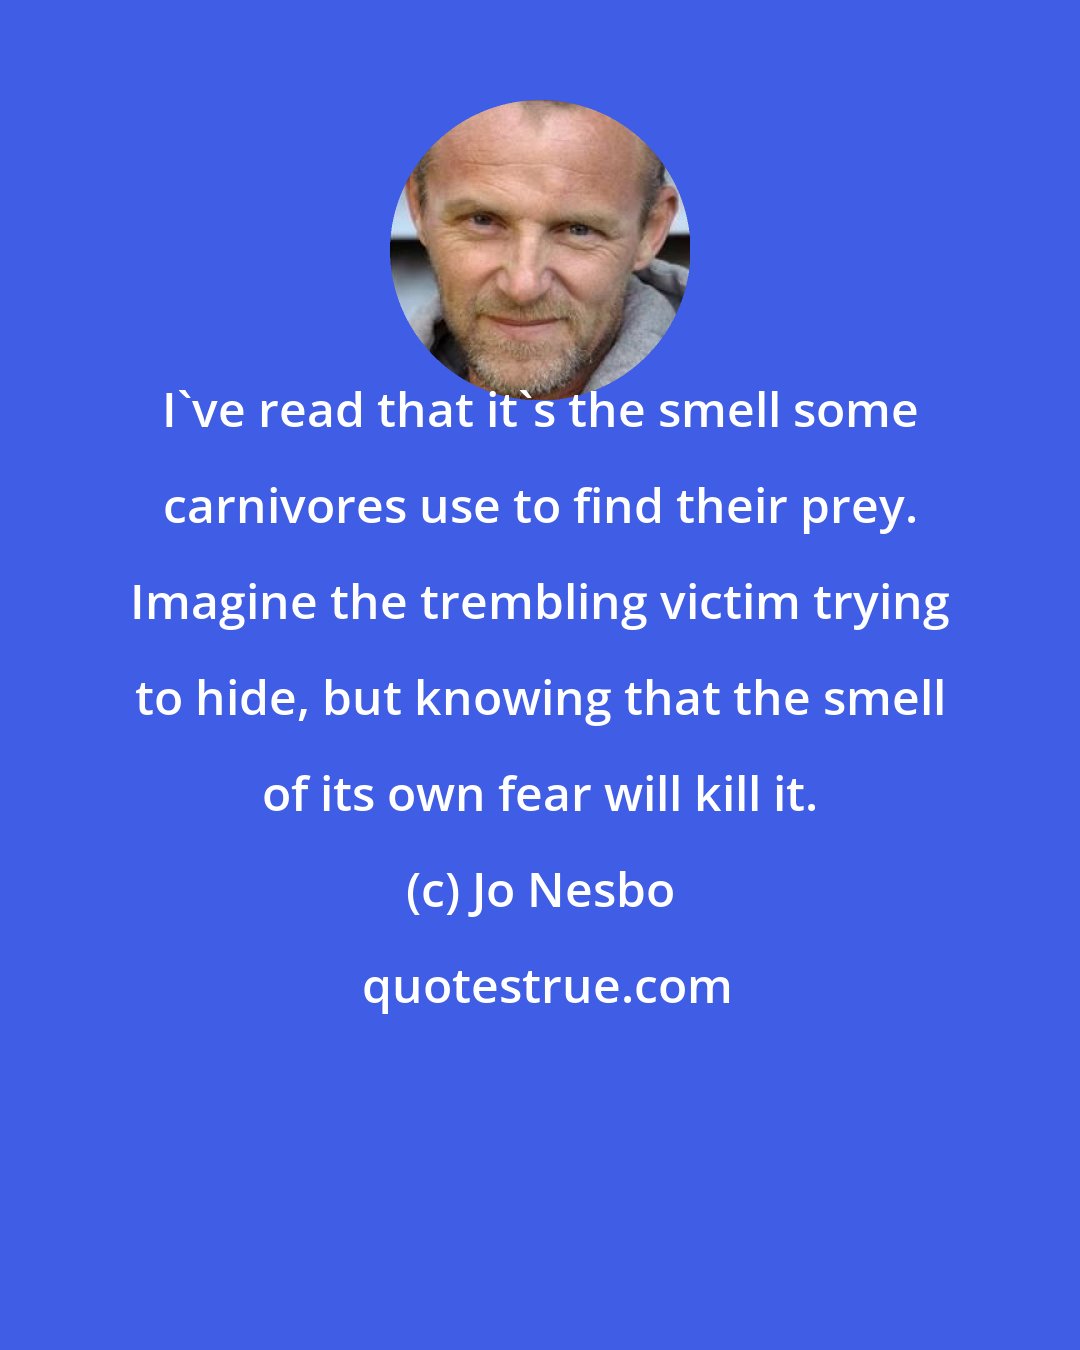 Jo Nesbo: I've read that it's the smell some carnivores use to find their prey. Imagine the trembling victim trying to hide, but knowing that the smell of its own fear will kill it.